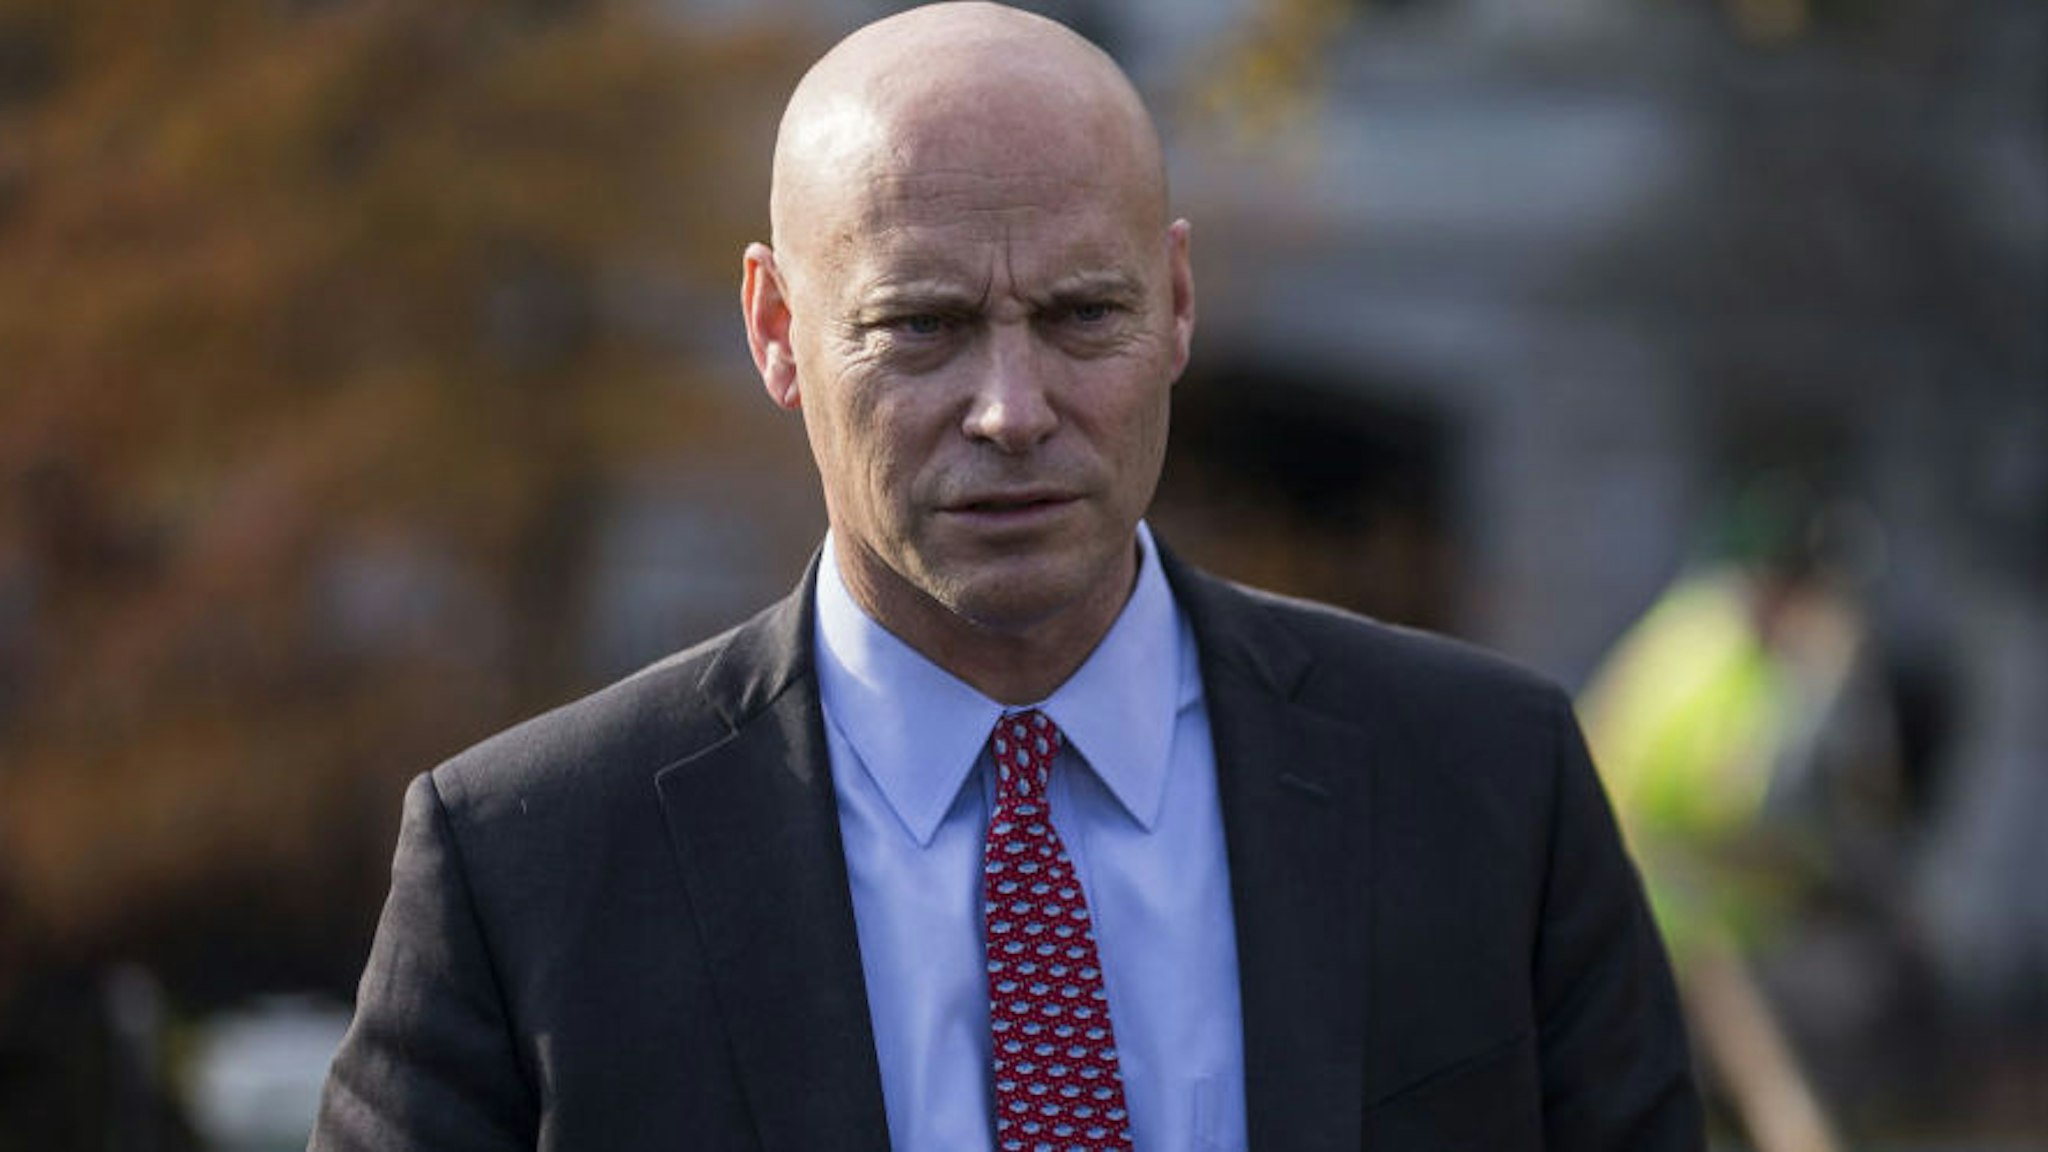 Marc Short, chief of staff to Vice President Mike Pence, speaks to members of the media outside the White House in Washington, D.C., U.S., on Tuesday, Nov. 19, 2019. Pence said Tuesday that it would be difficult for the U.S. to sign a trade agreement with China if demonstrations in Hong Kong are met with violence.